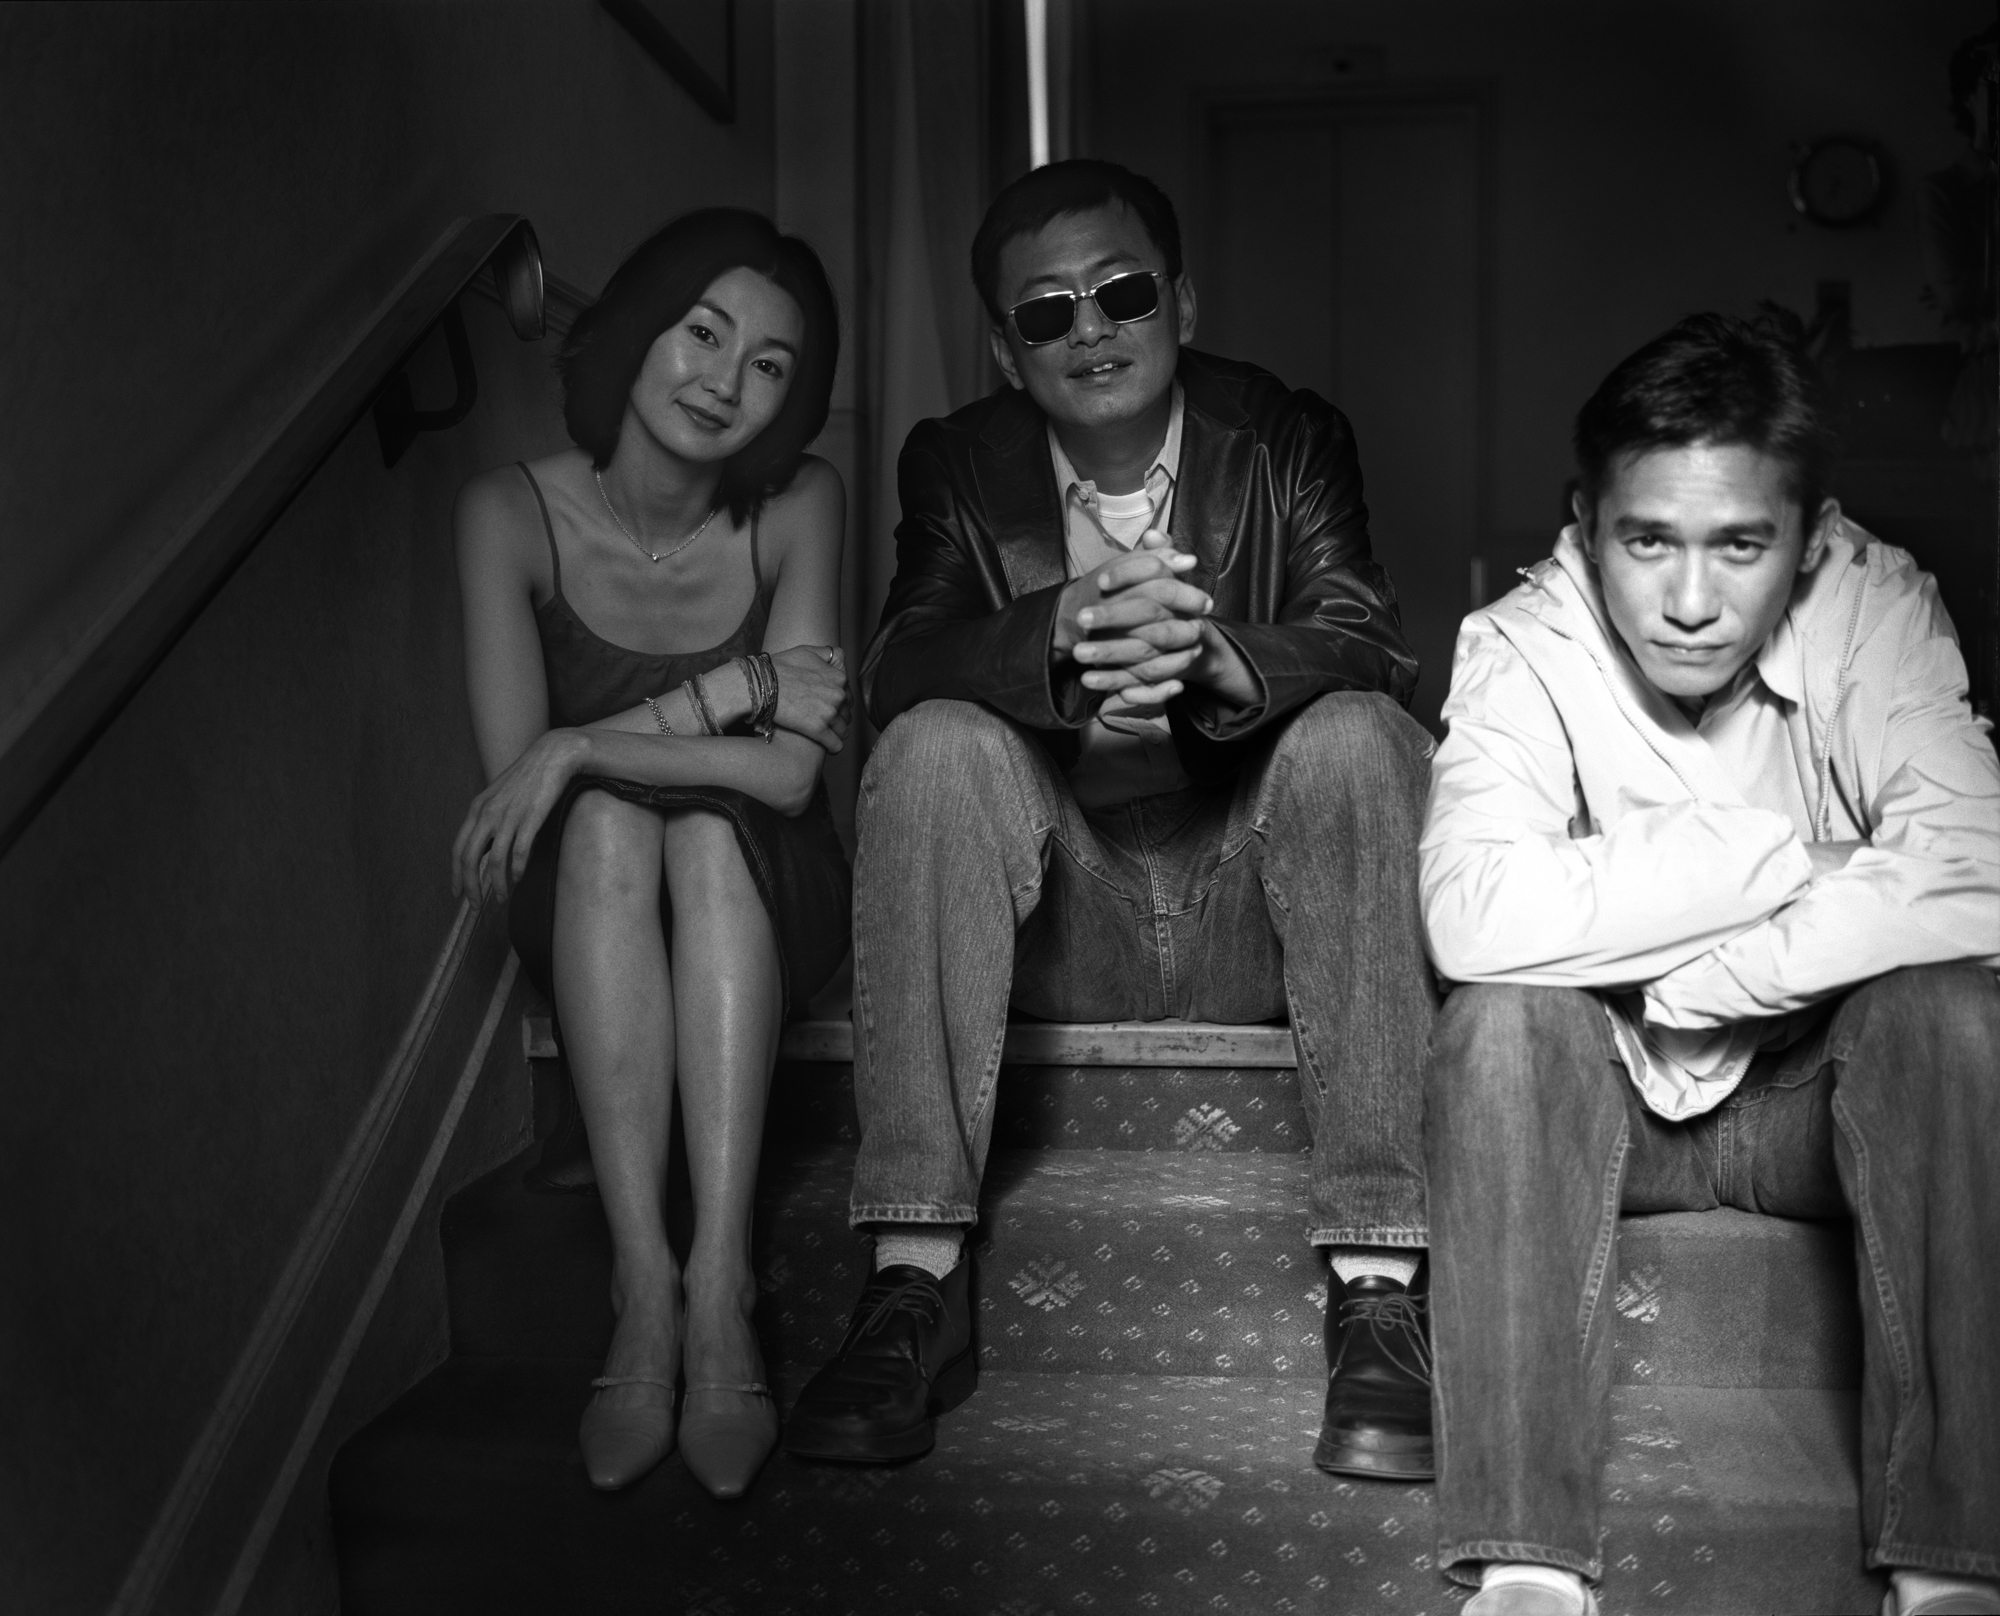 Maggie Cheung, Wong Kar-wai, and Tony Leung Chiu-wai, "In the Mood for Love", Cannes, France, 2000